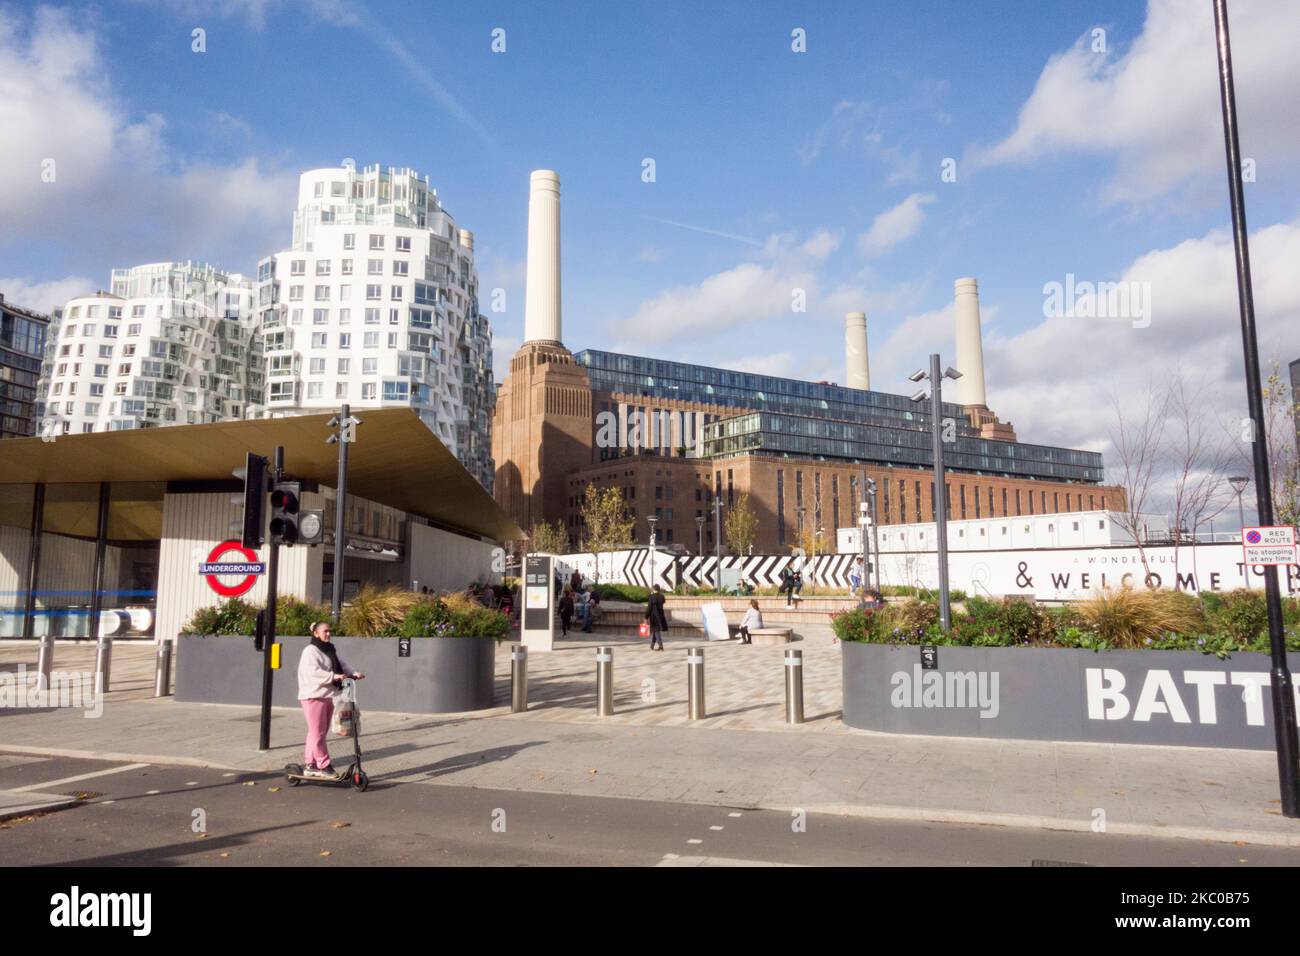 Battersea Power Station and Underground Station, Nine Elms, Vauxhall, Londres, Angleterre, ROYAUME-UNI Banque D'Images